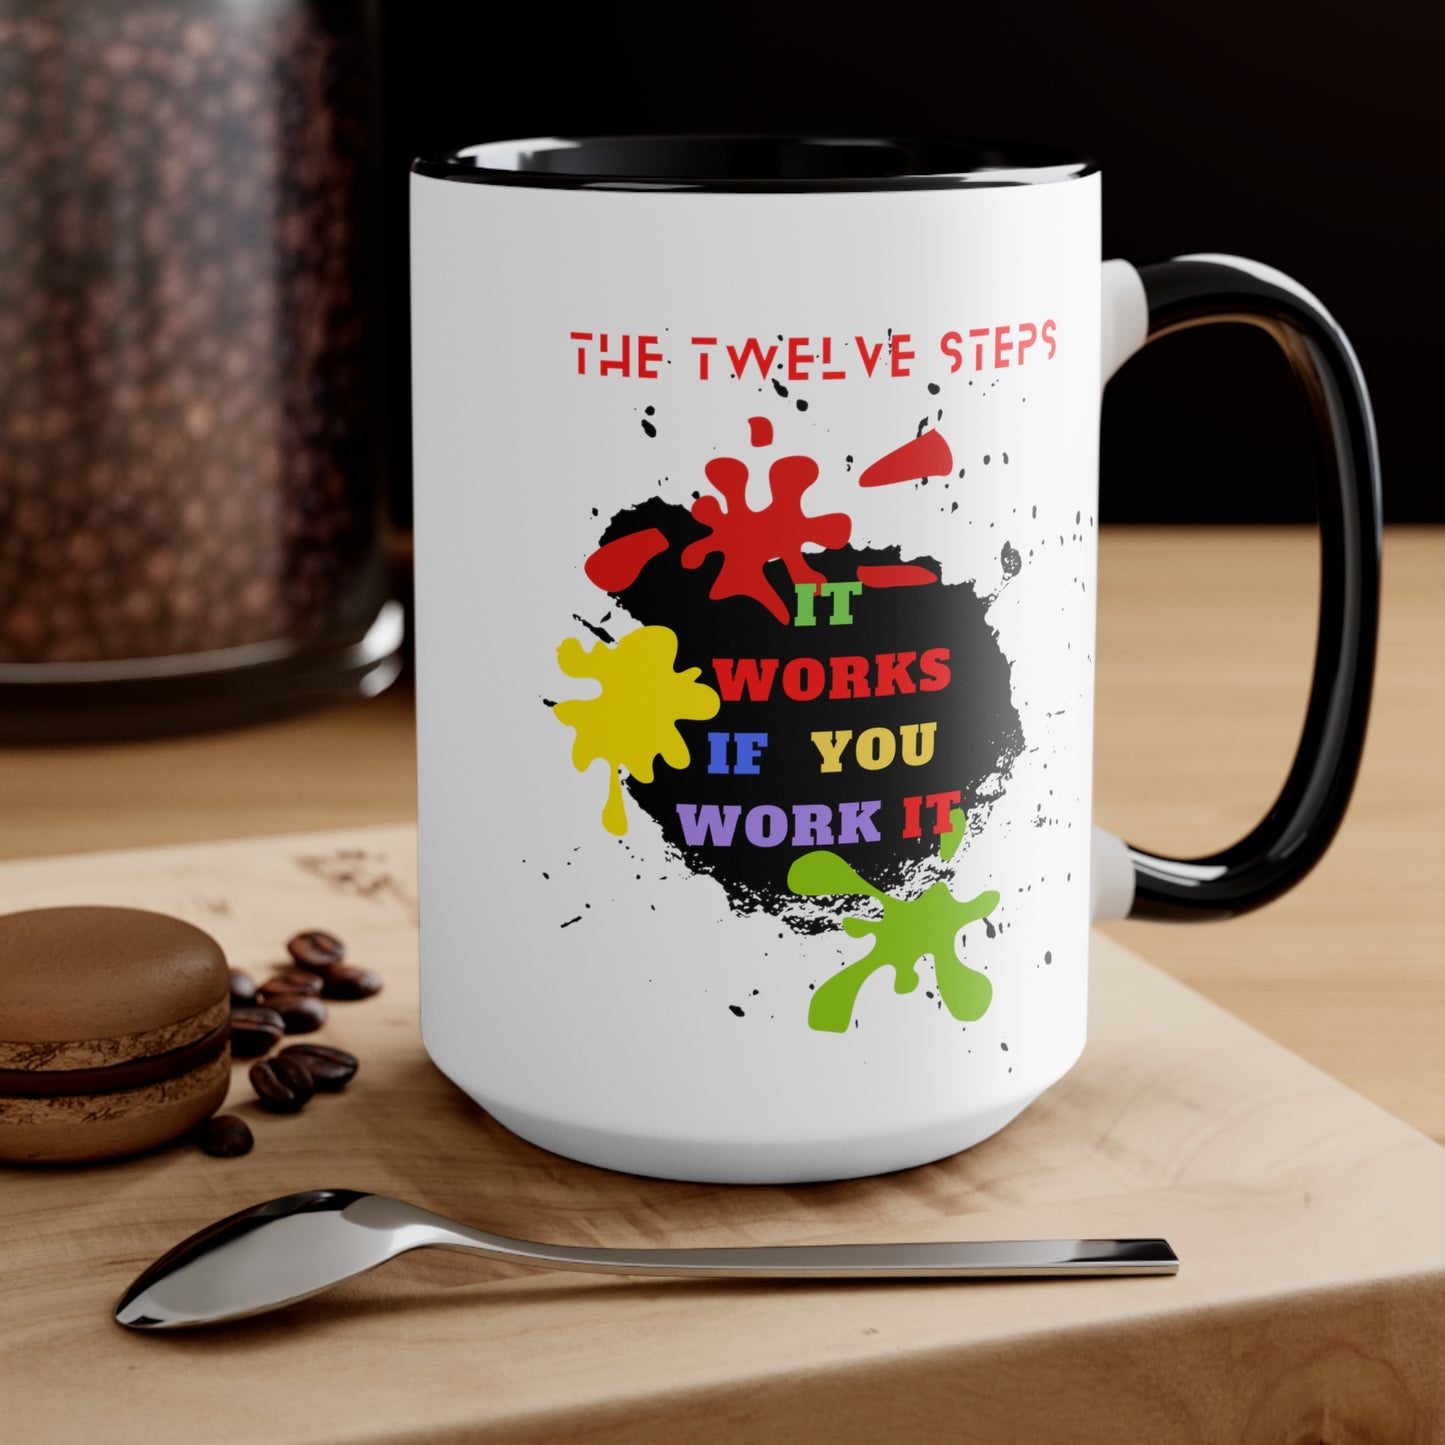 "It Works If You Work It" Ex-Large Recovery Mug